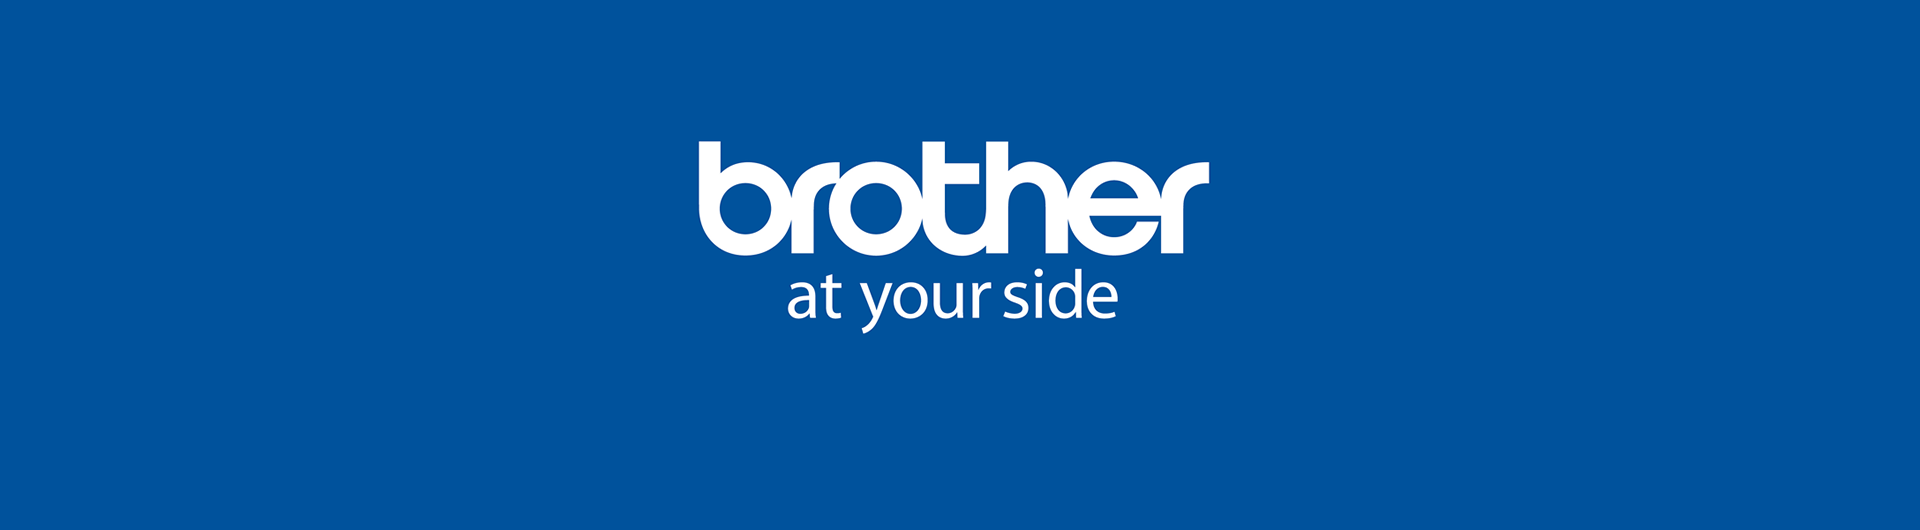 Brother, 100 anos ‘at your side’